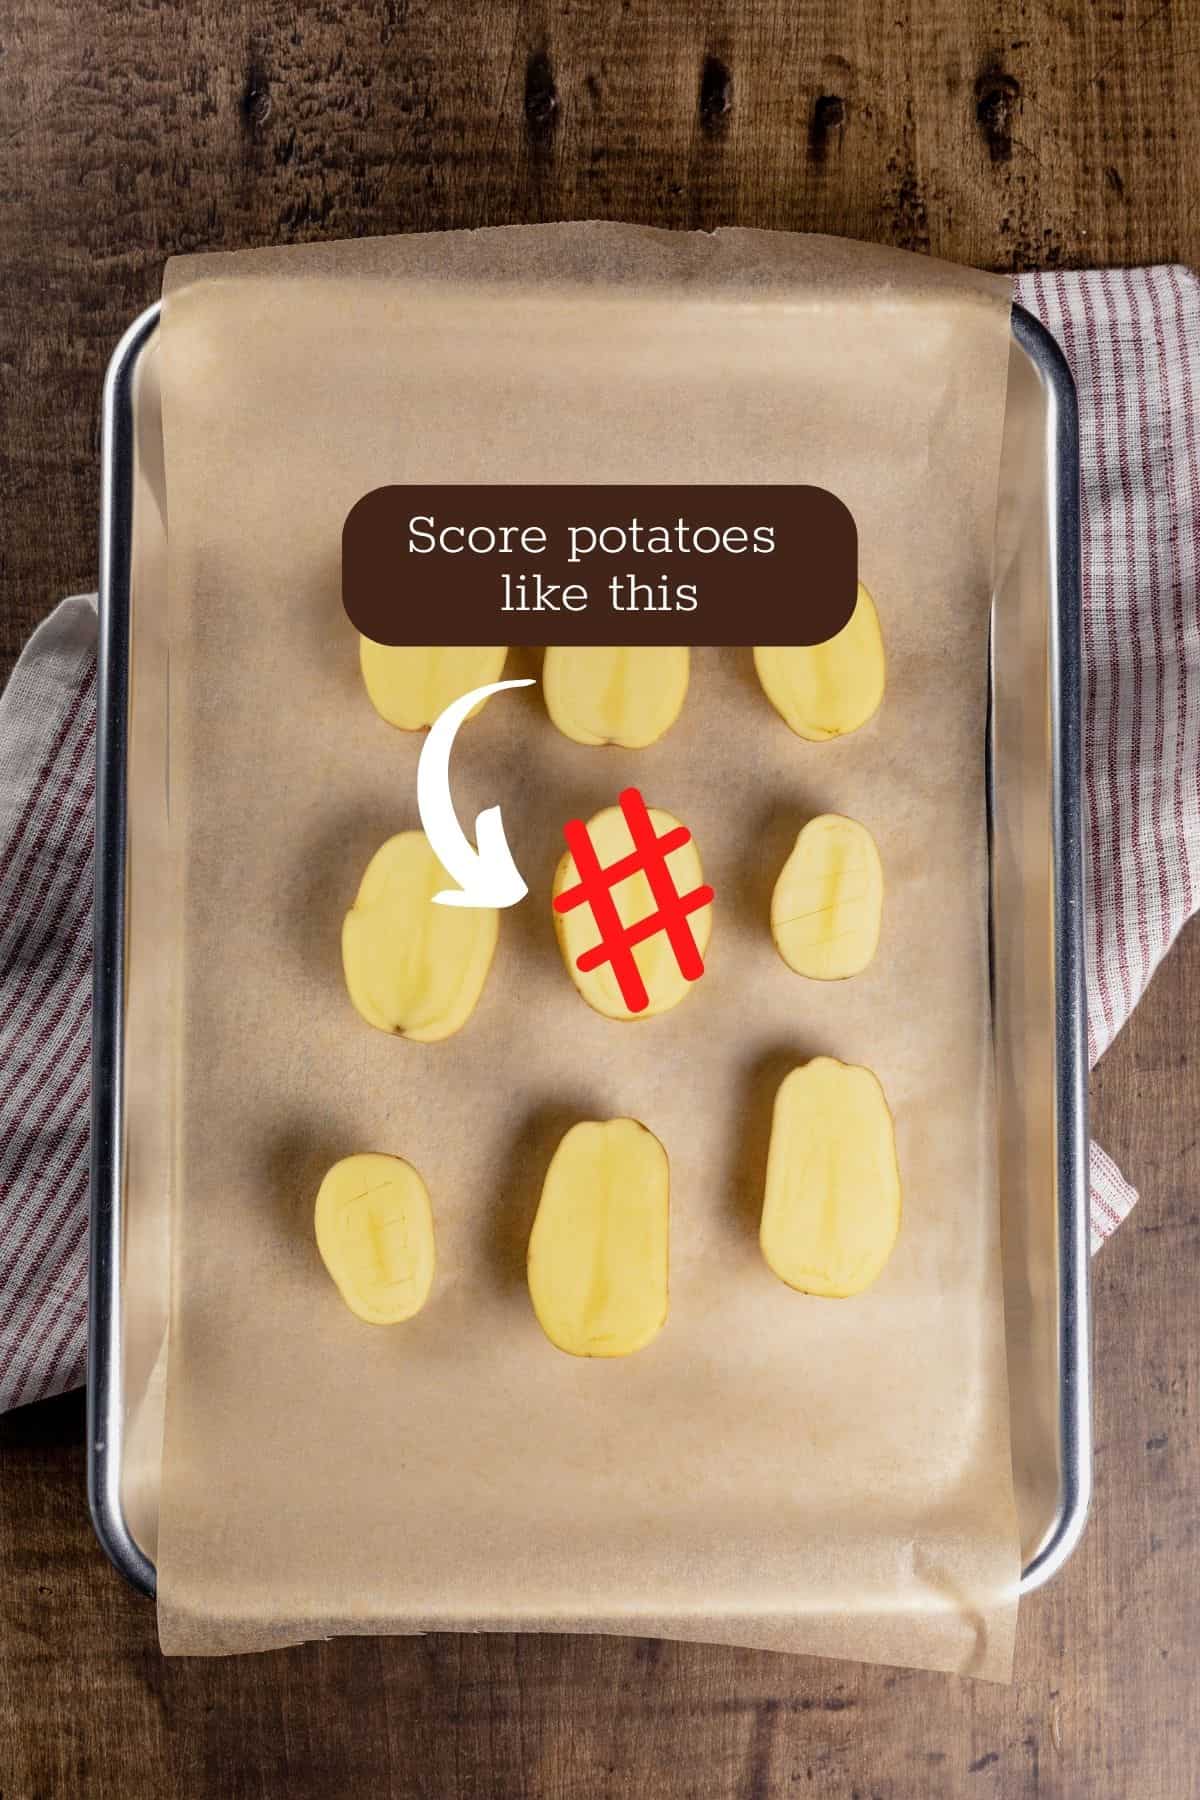 9 halved potatoes on a baking sheet with a hashtag and text describing where to cut the potatoes.